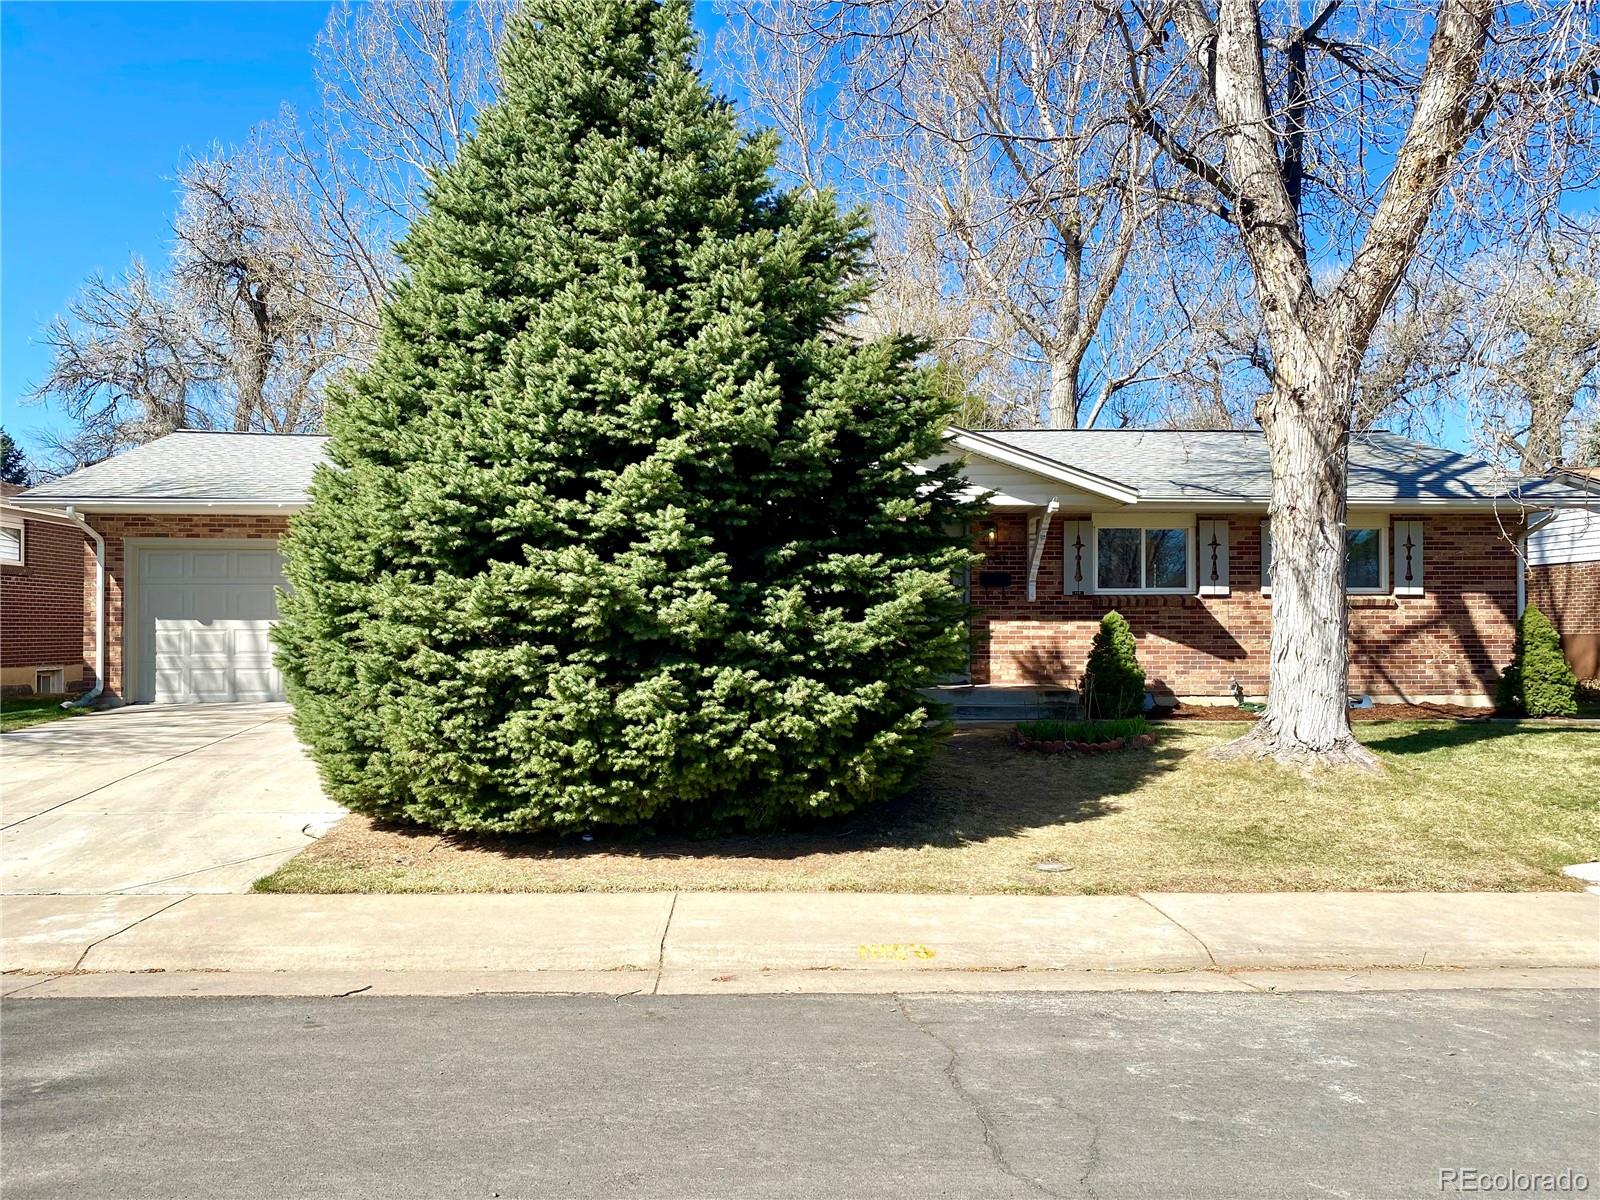 a view of a house with a yard and tree s